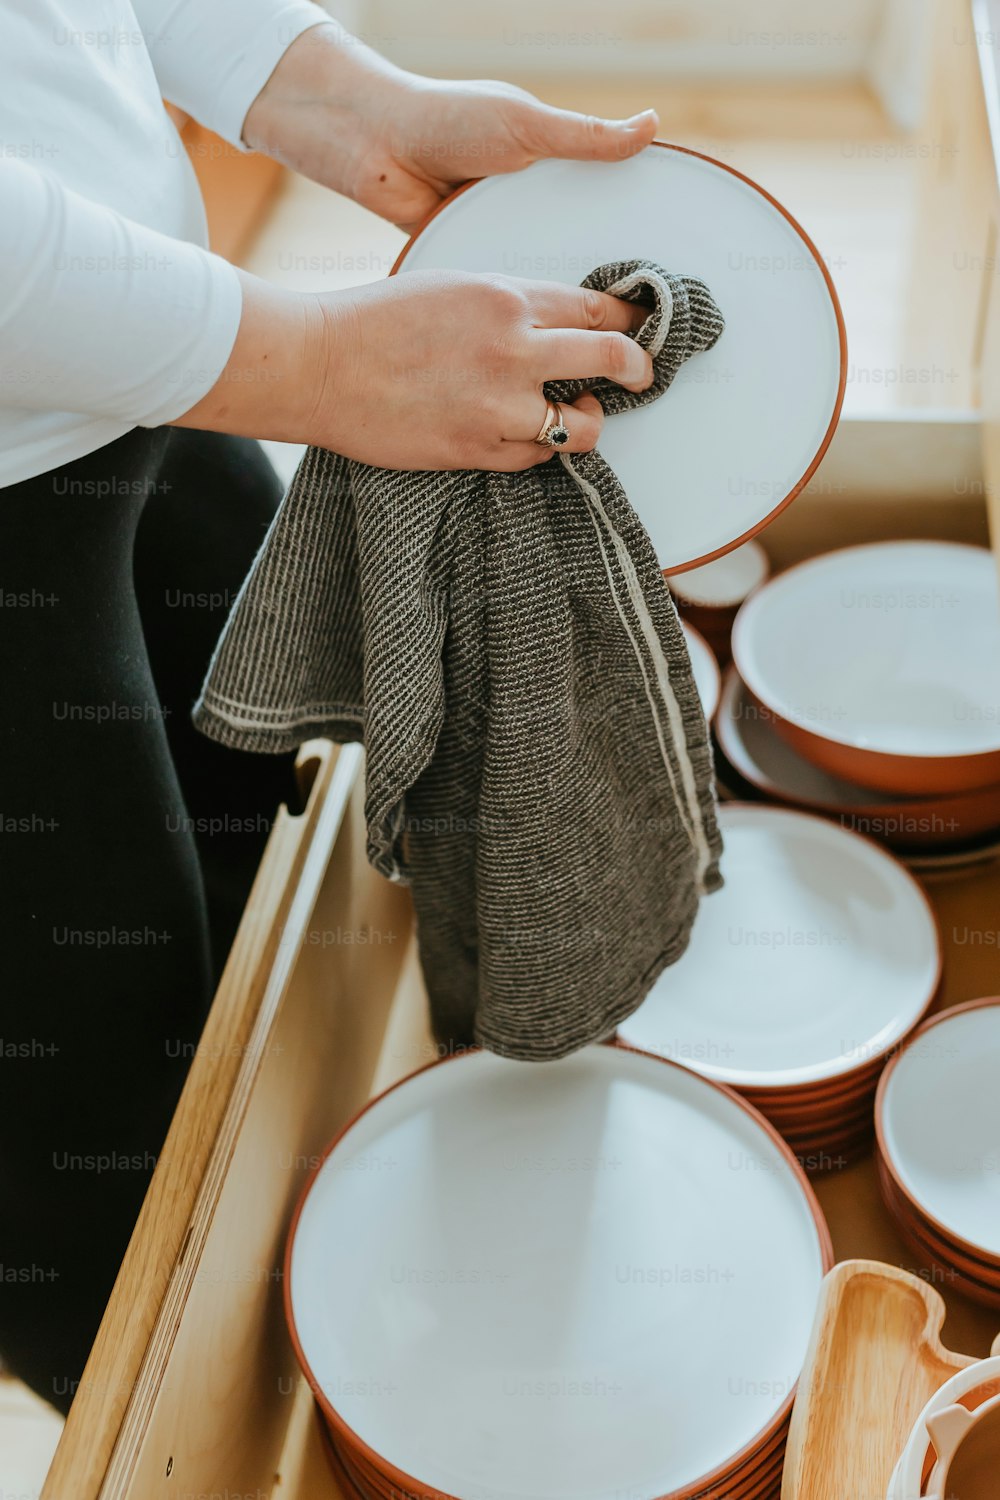 a person holding a cloth over a drawer full of dishes